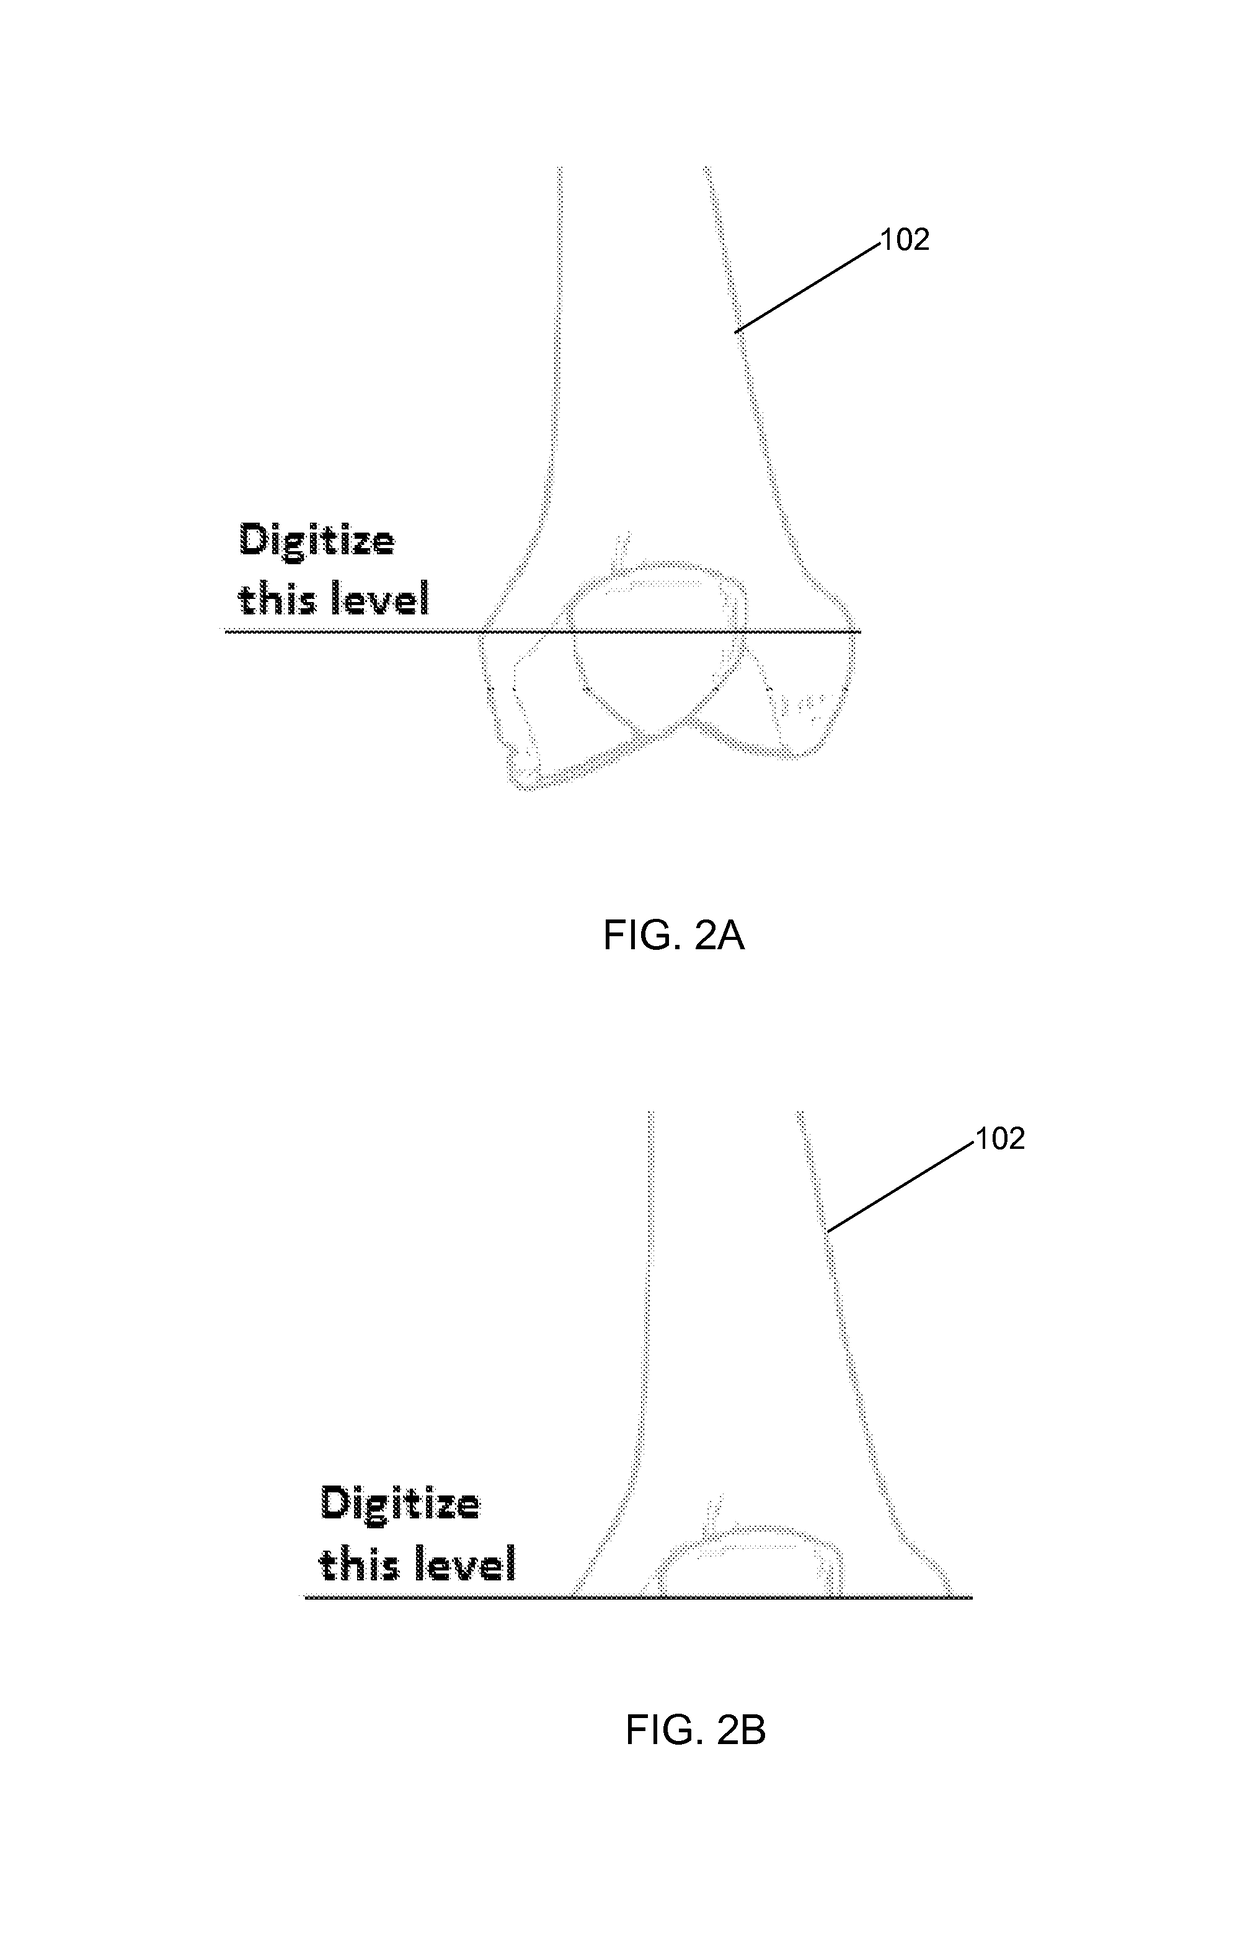 Implant based planning, digitizing, and registration for total joint arthroplasty